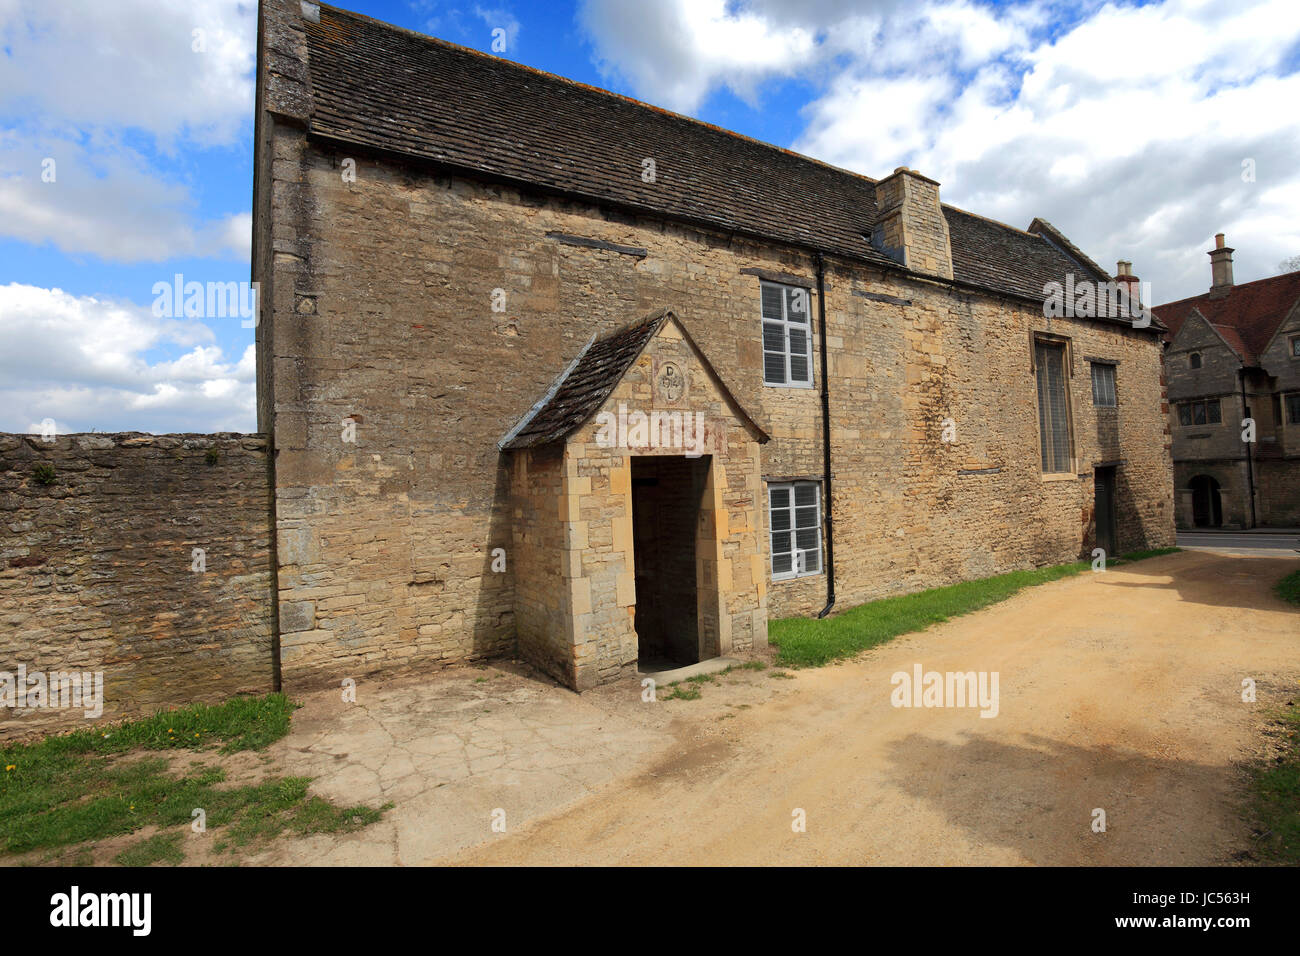 Exterior of Chichele College, Higham Ferrers town, Northamptonshire, England, UK Stock Photo